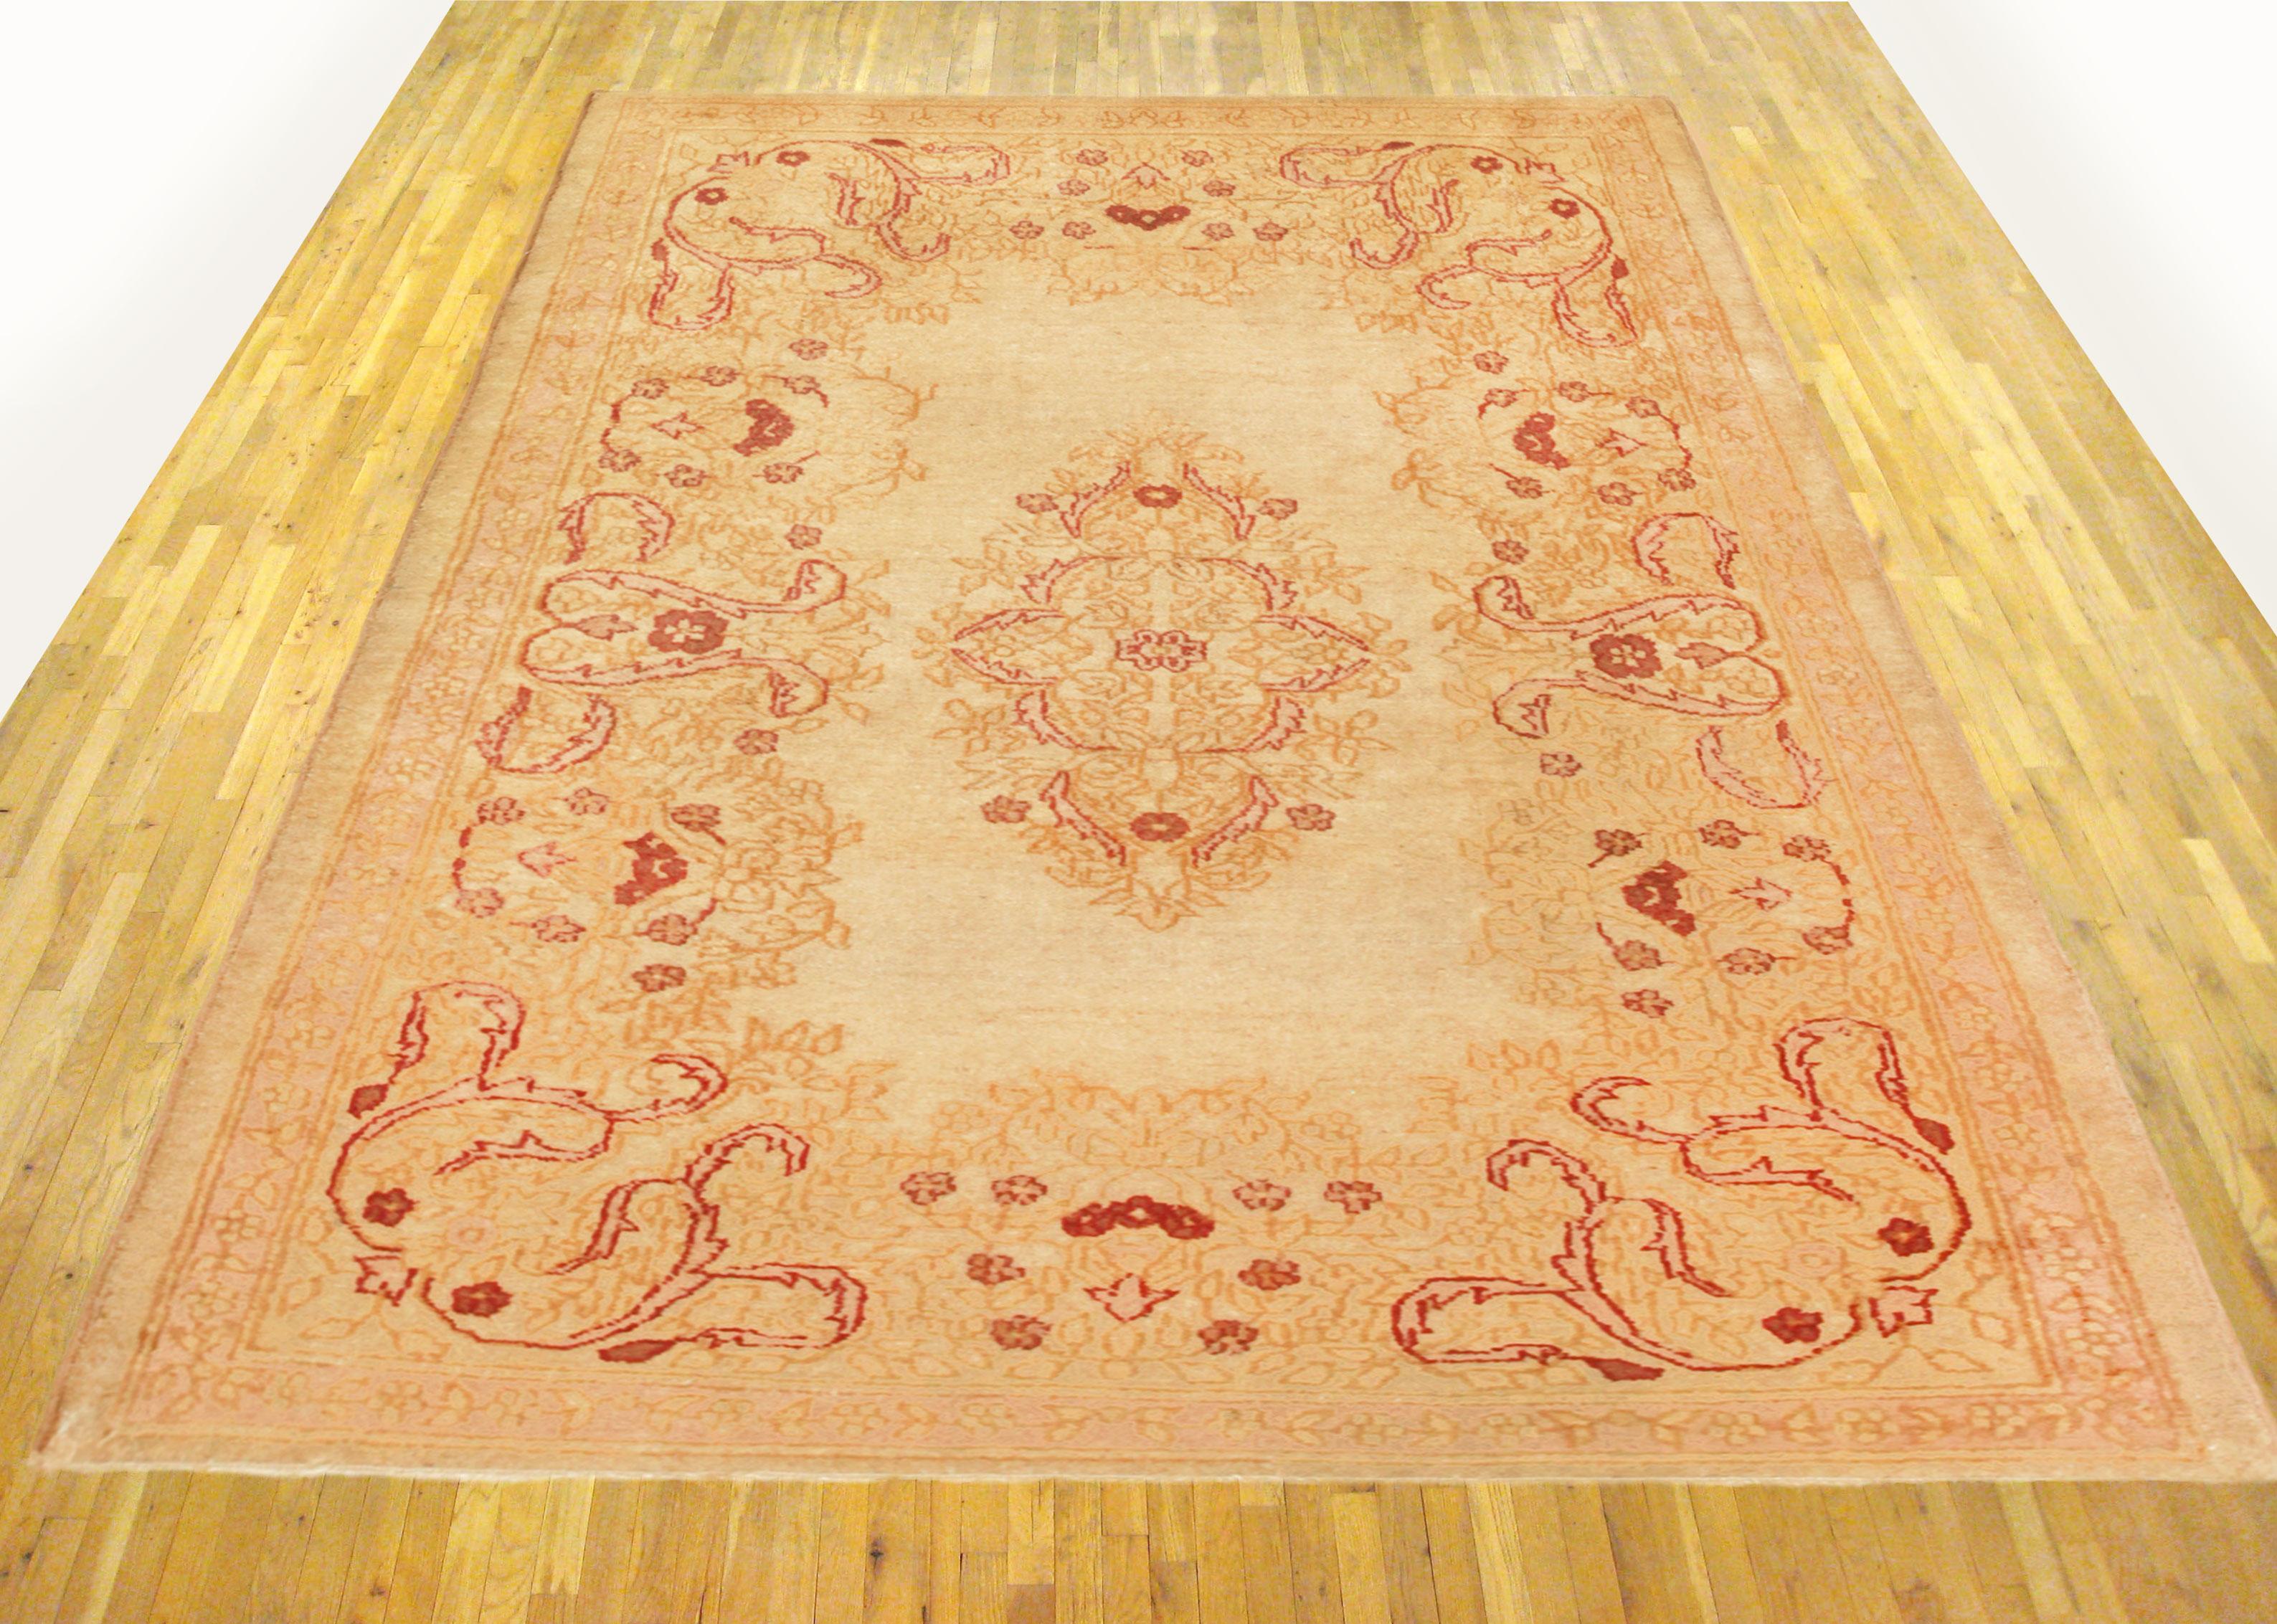 Antique Indian amritsar rug, Small size, circa 1890

A one-of-a-kind antique Indian Amritsar Oriental Carpet, hand-knotted with soft wool pile. This gorgeous carpet features a central medallion with a repeating floral design on the ivory primary